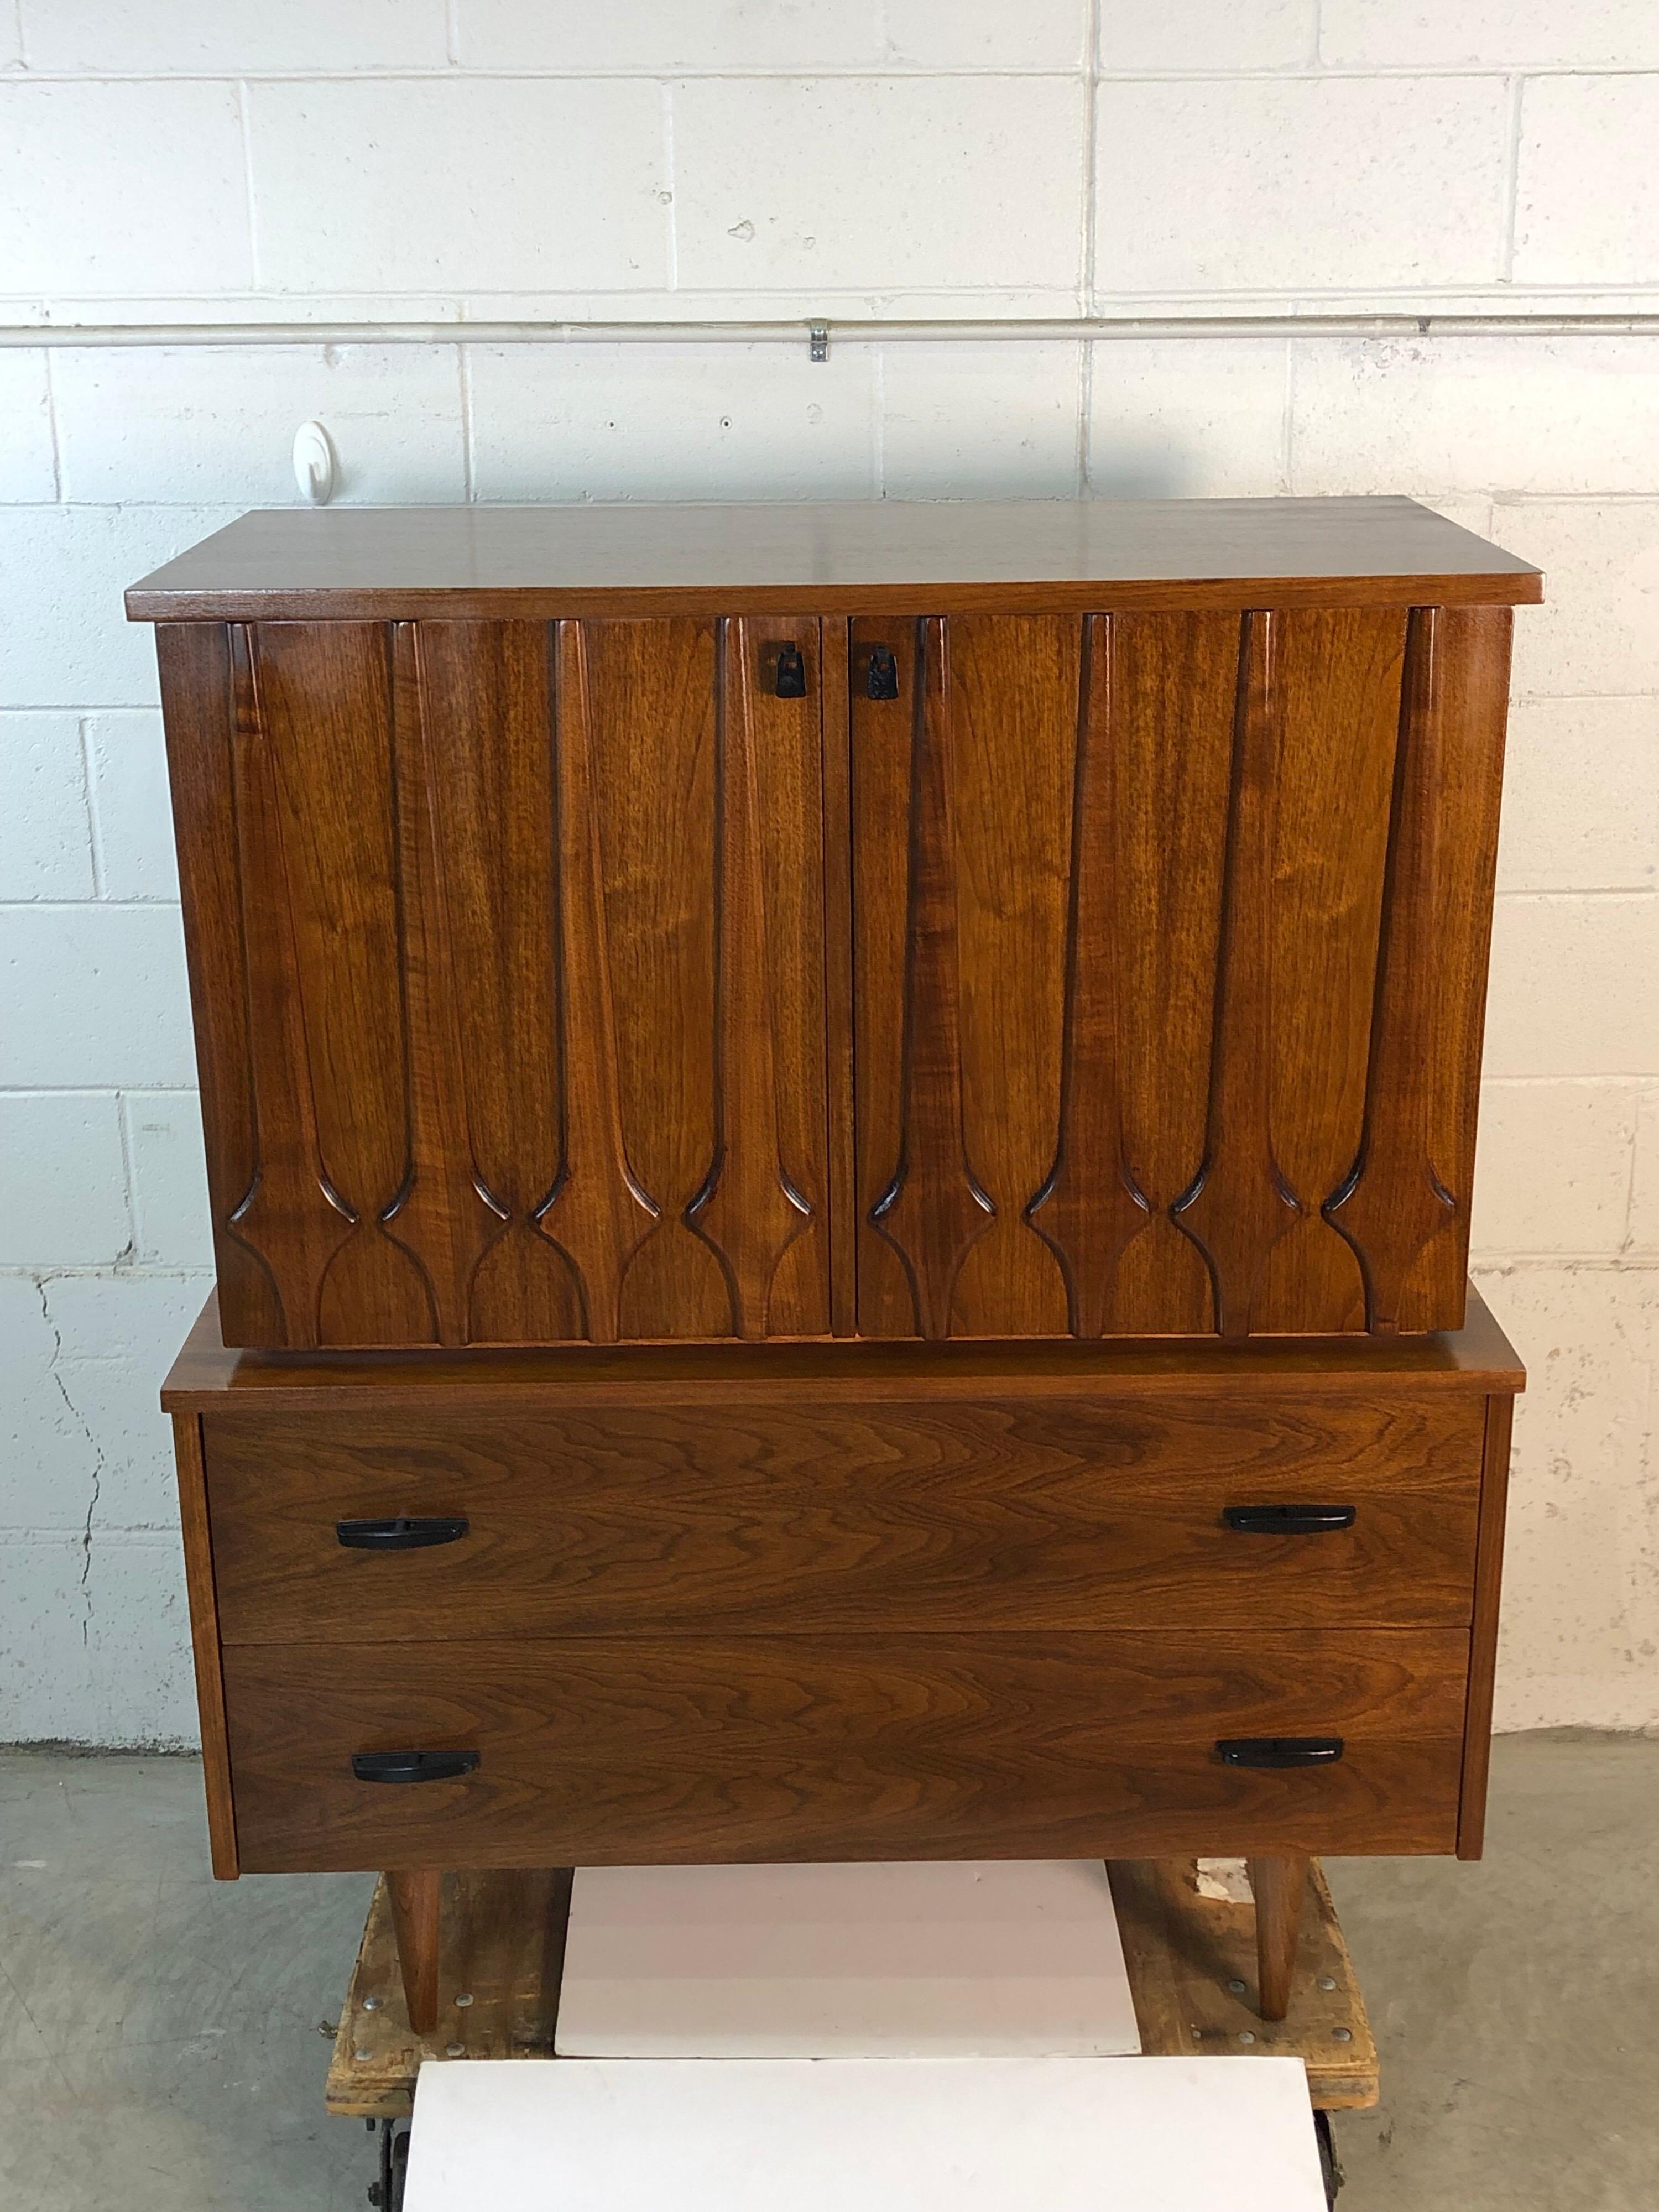 Vintage 1960s walnut sculpted front tall highboy dresser with eight drawers. The top has six drawers and the bottom has two drawers. All the drawers are deep and can hold a lot of items. This is one a piece dresser. The dresser is newly refinished